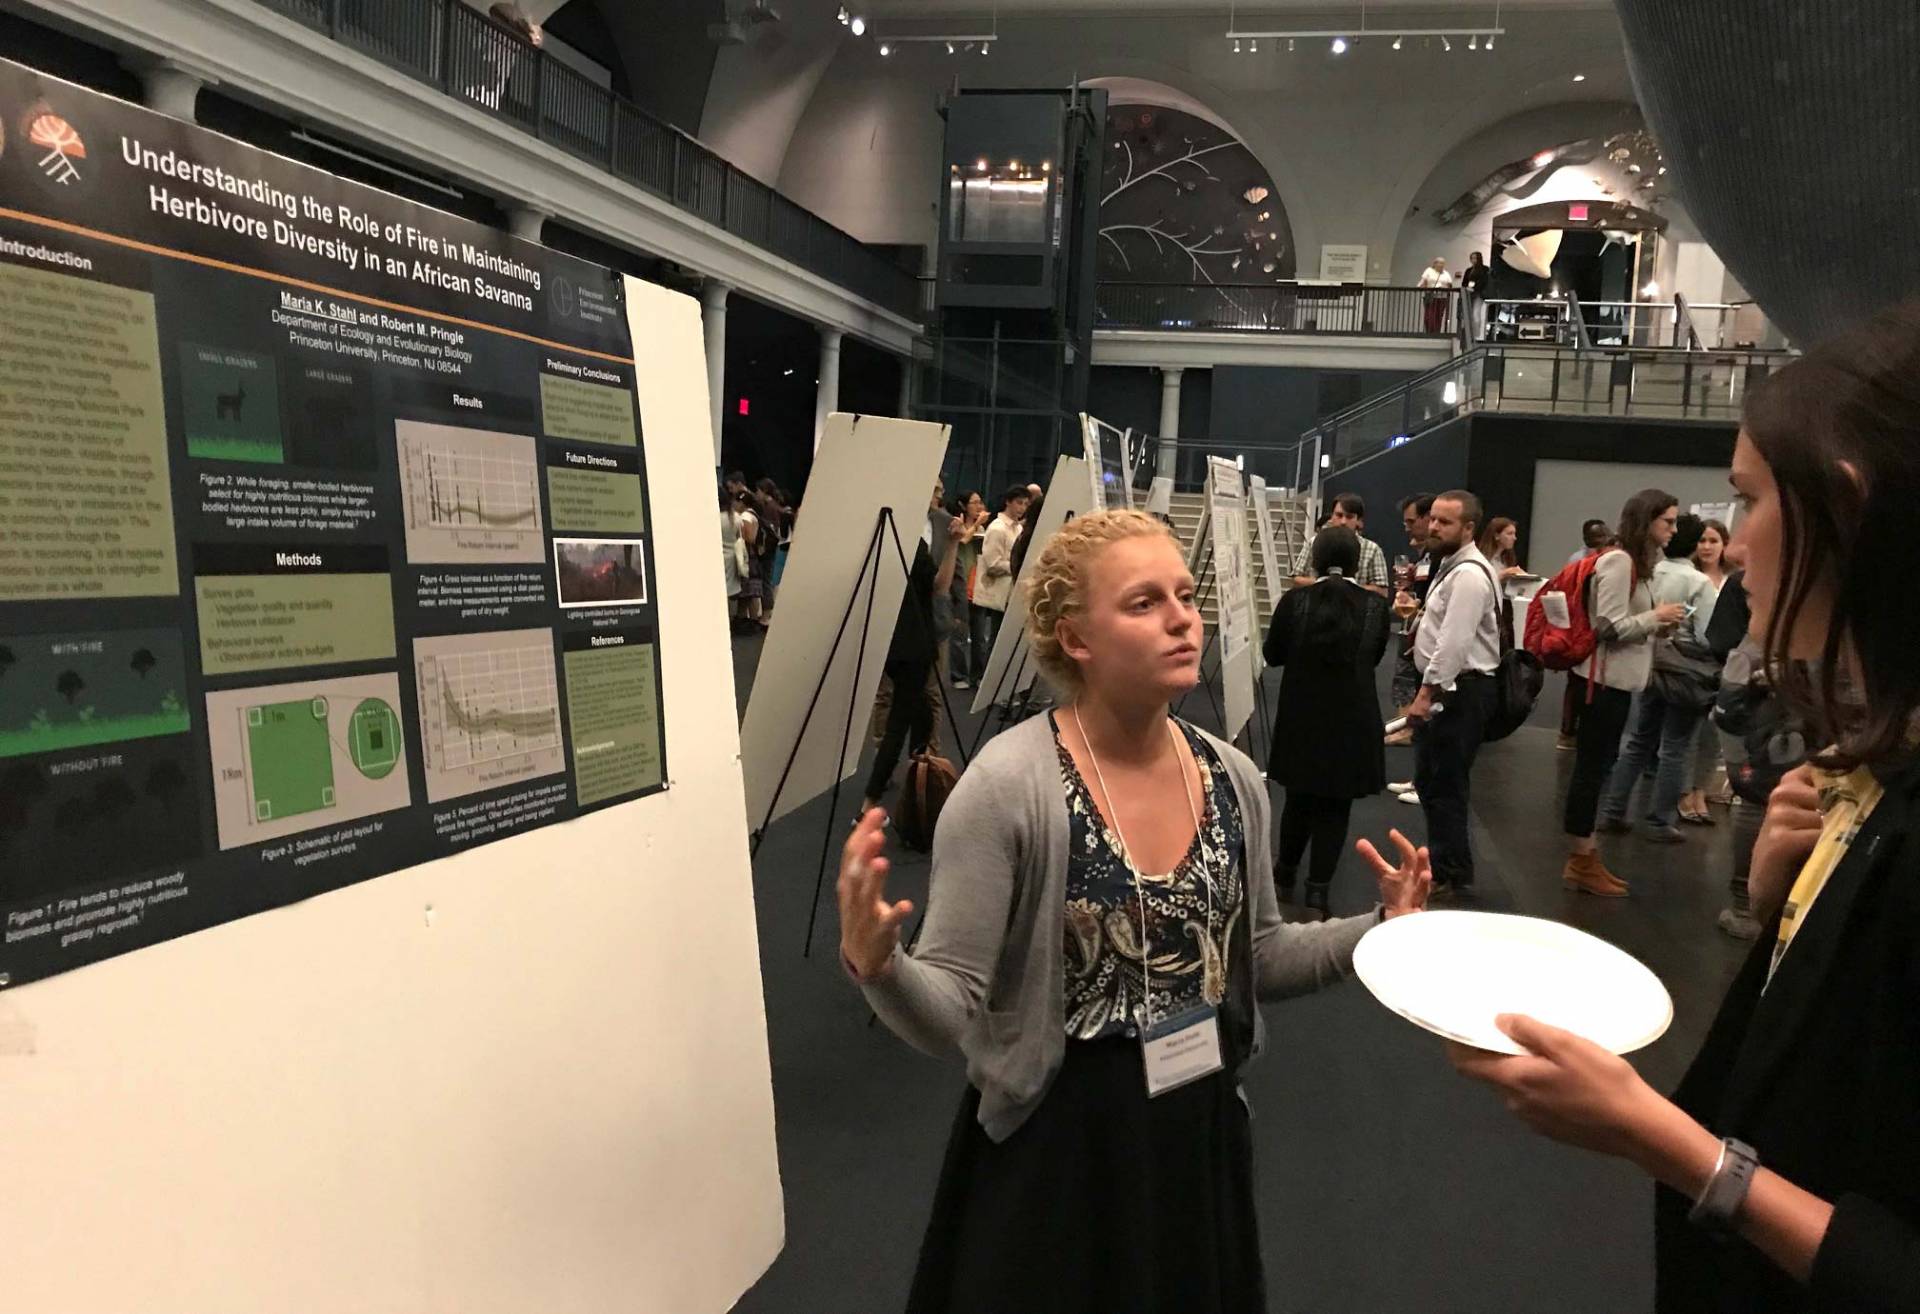 Stahl presents her research in front of her poster